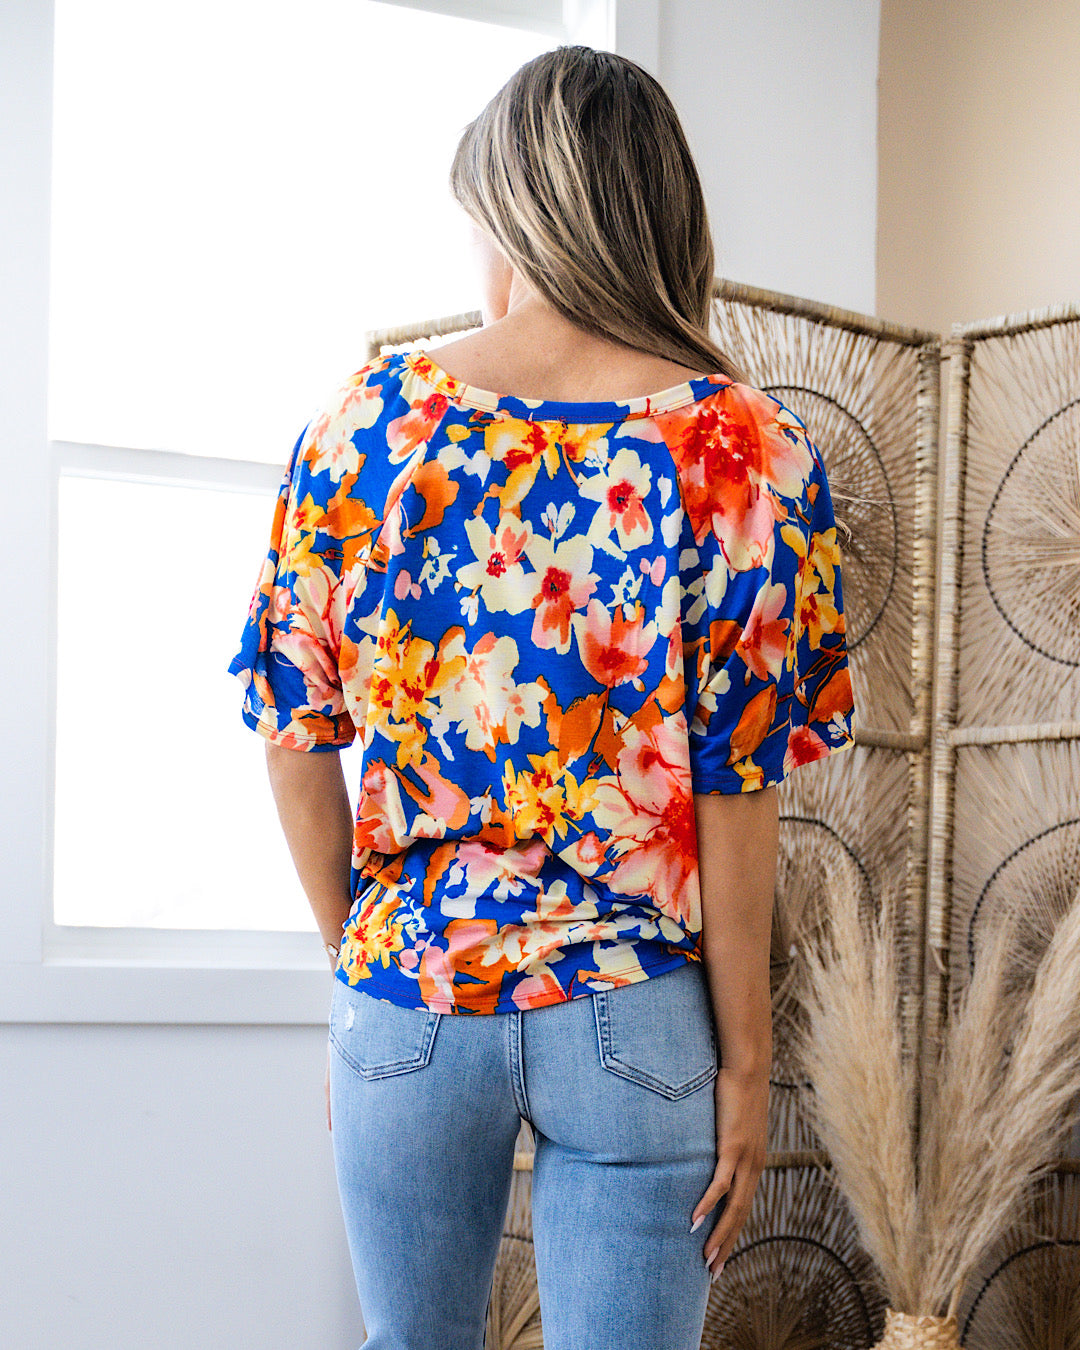 NEW! Brenda Royal Blue and Orange Floral Top  Sew In Love   